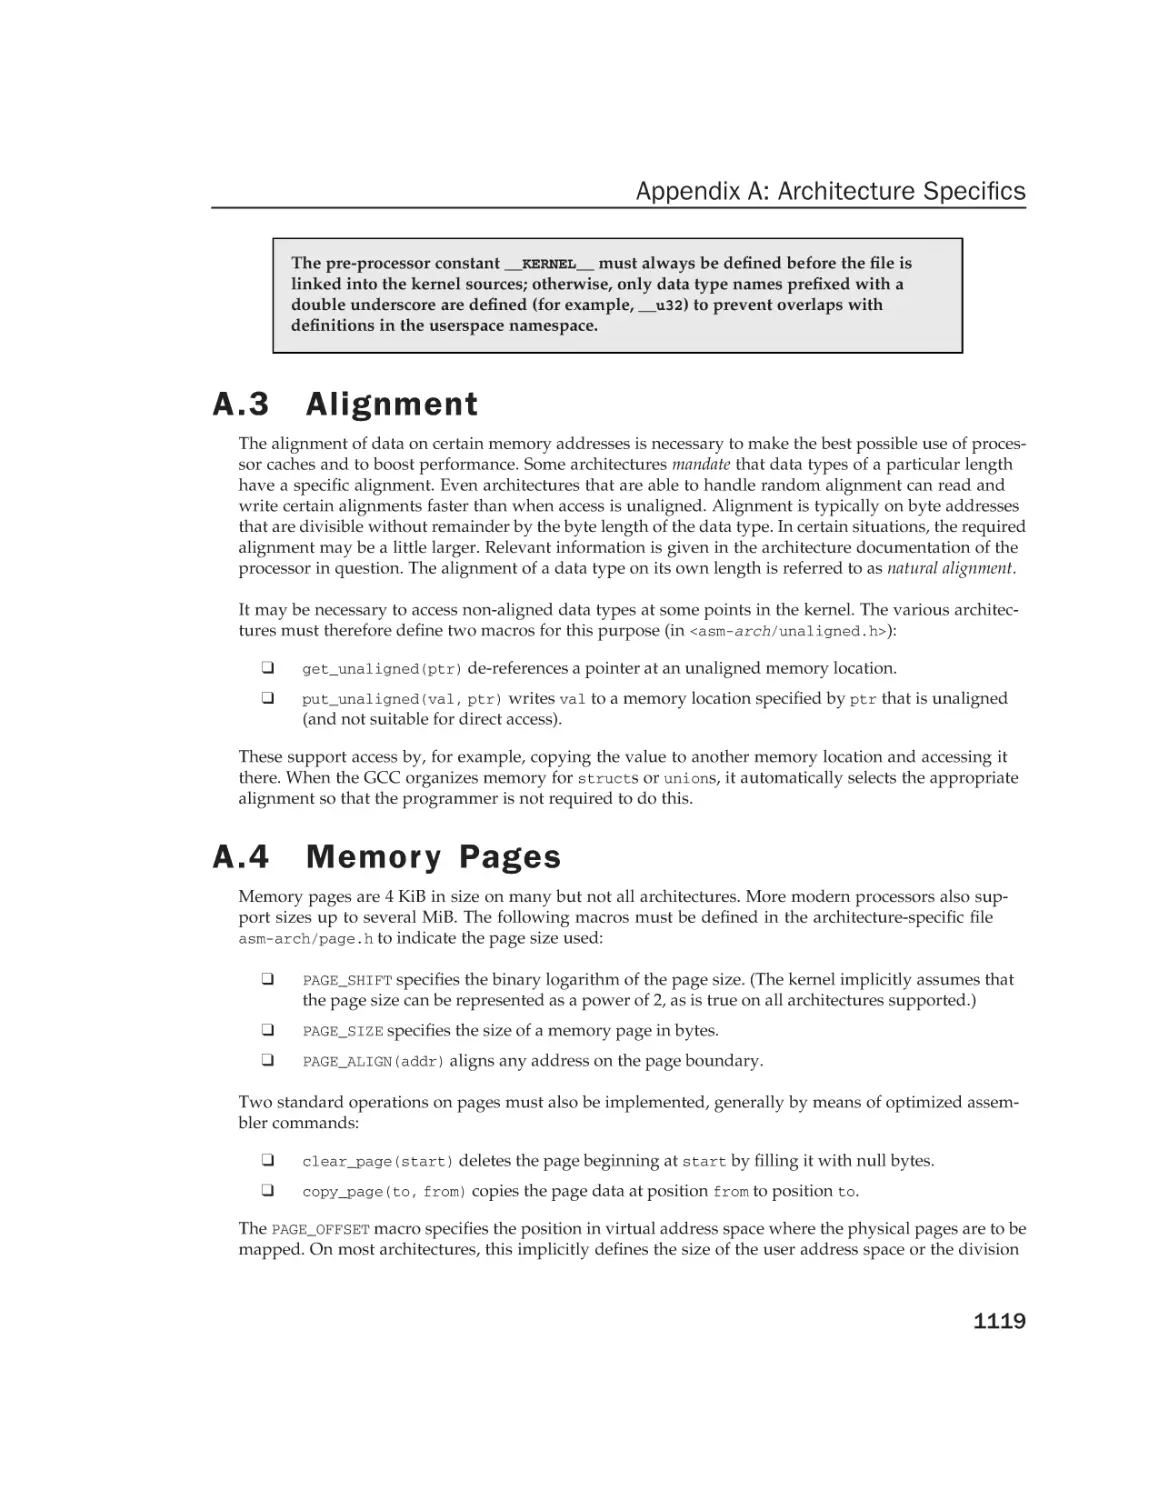 A.3 Alignment
A.4 Memory Pages